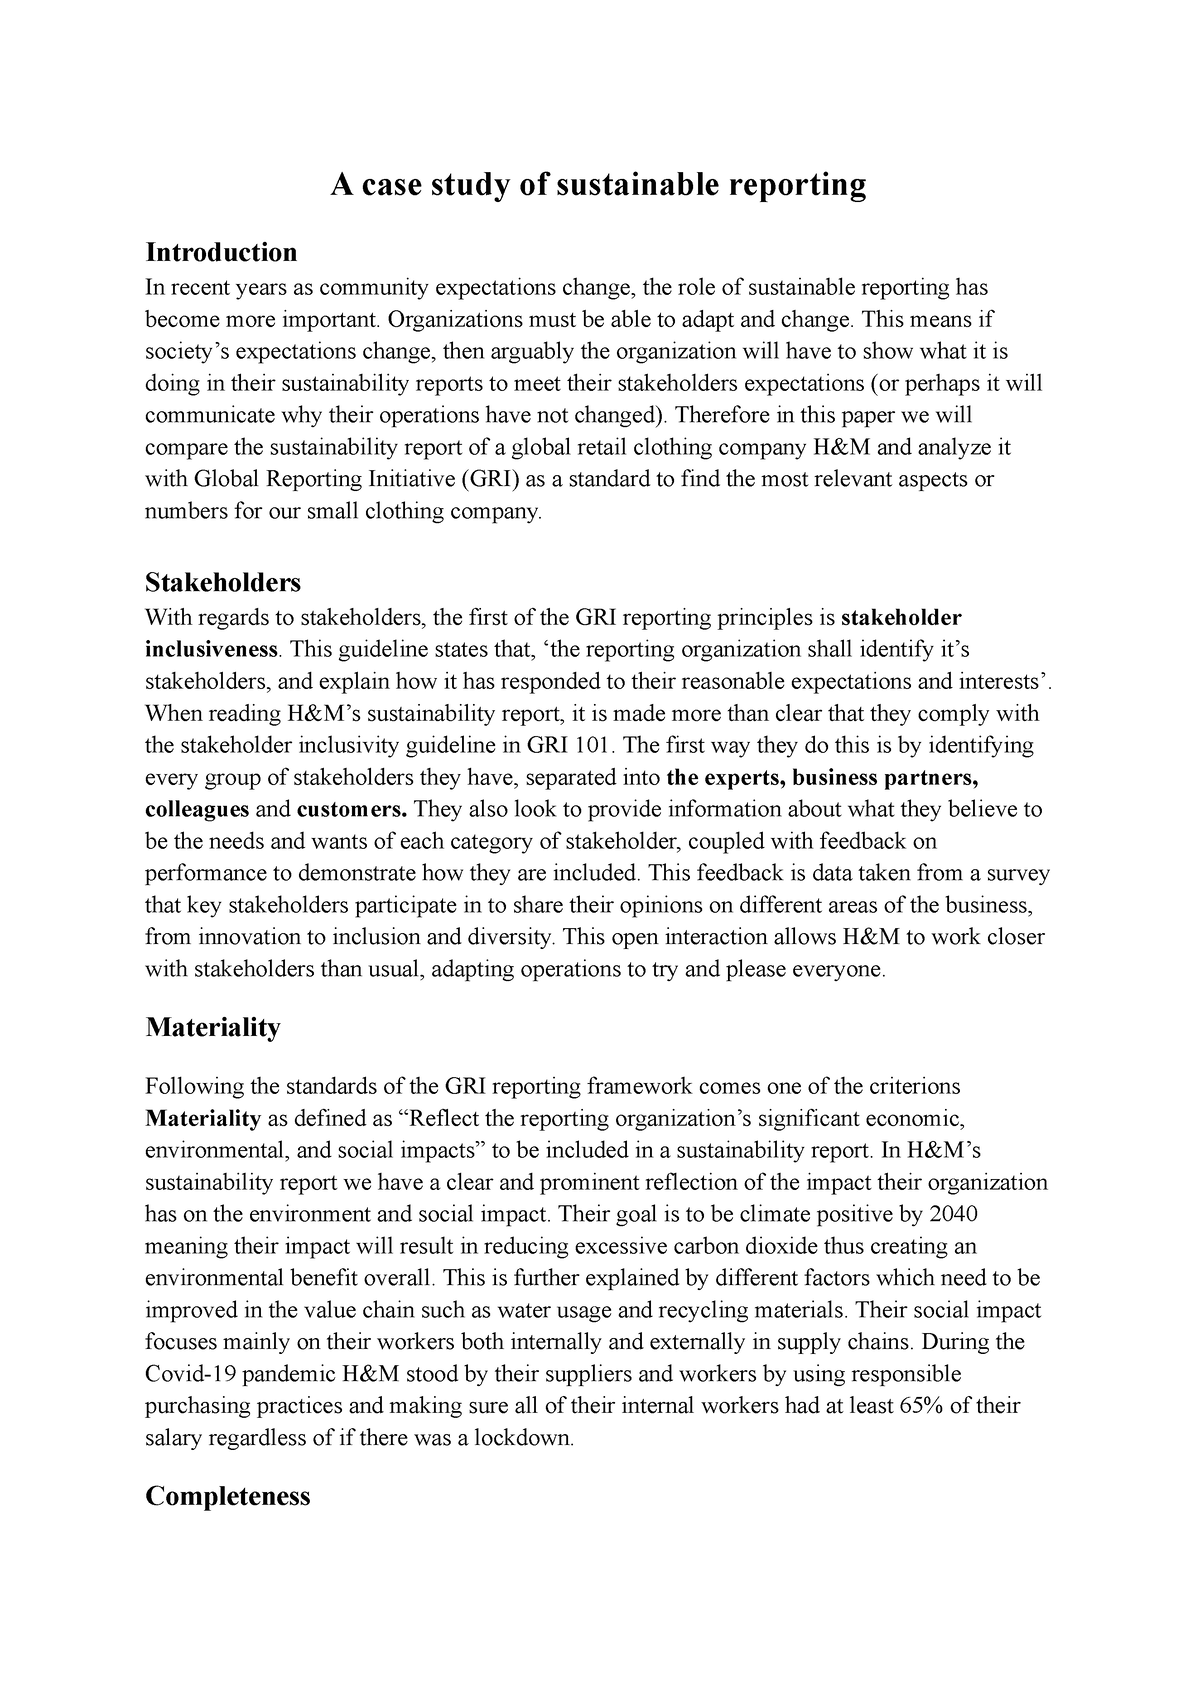 research paper on sustainability reporting